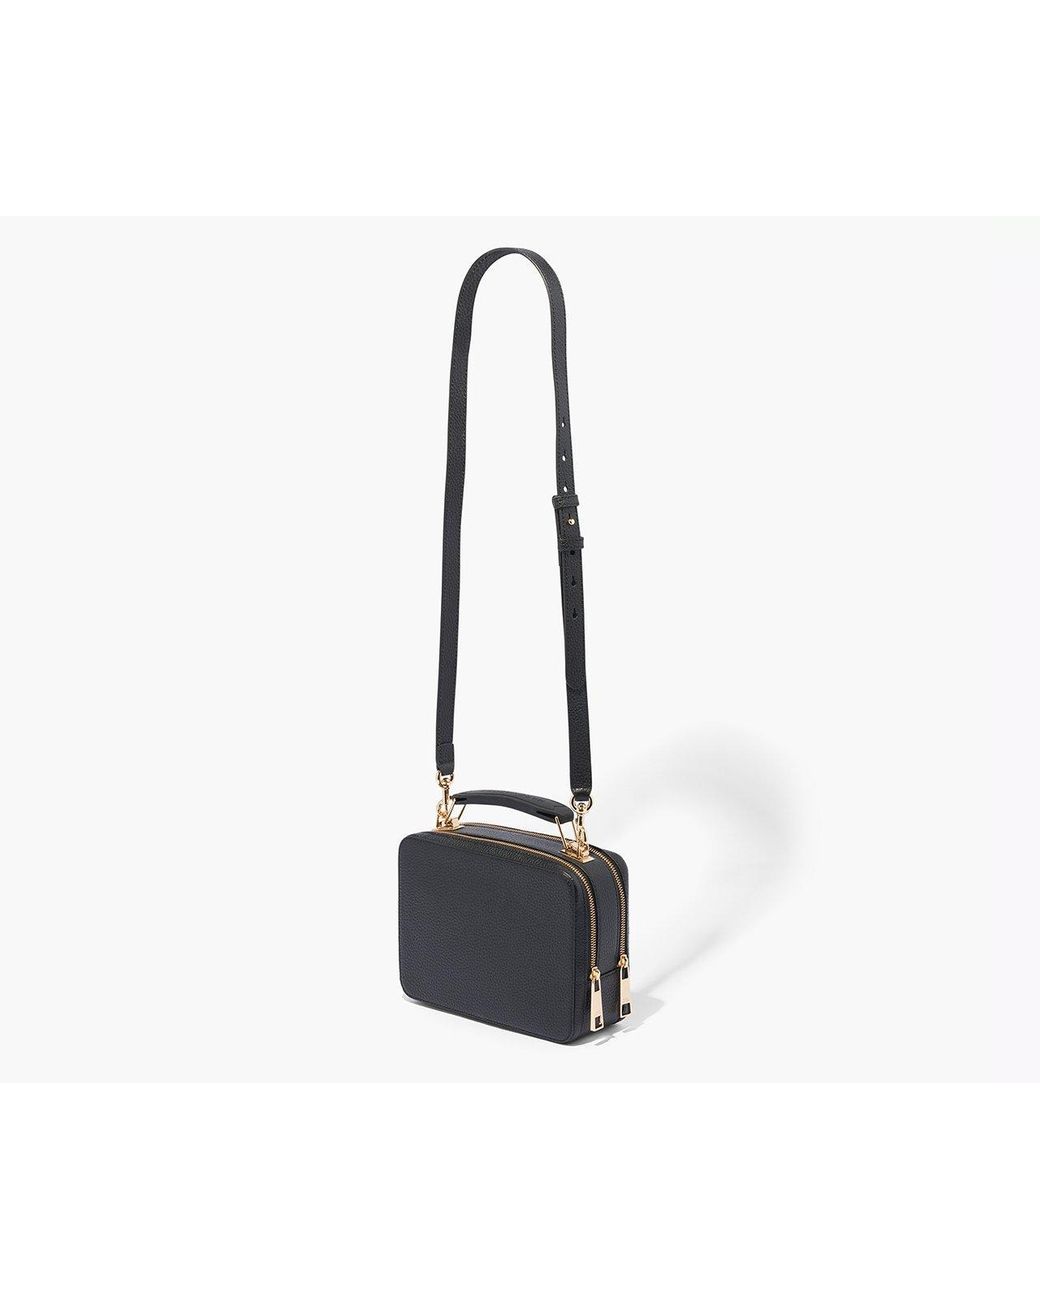 Marc Jacobs The Textured Box Bag in Black | Lyst